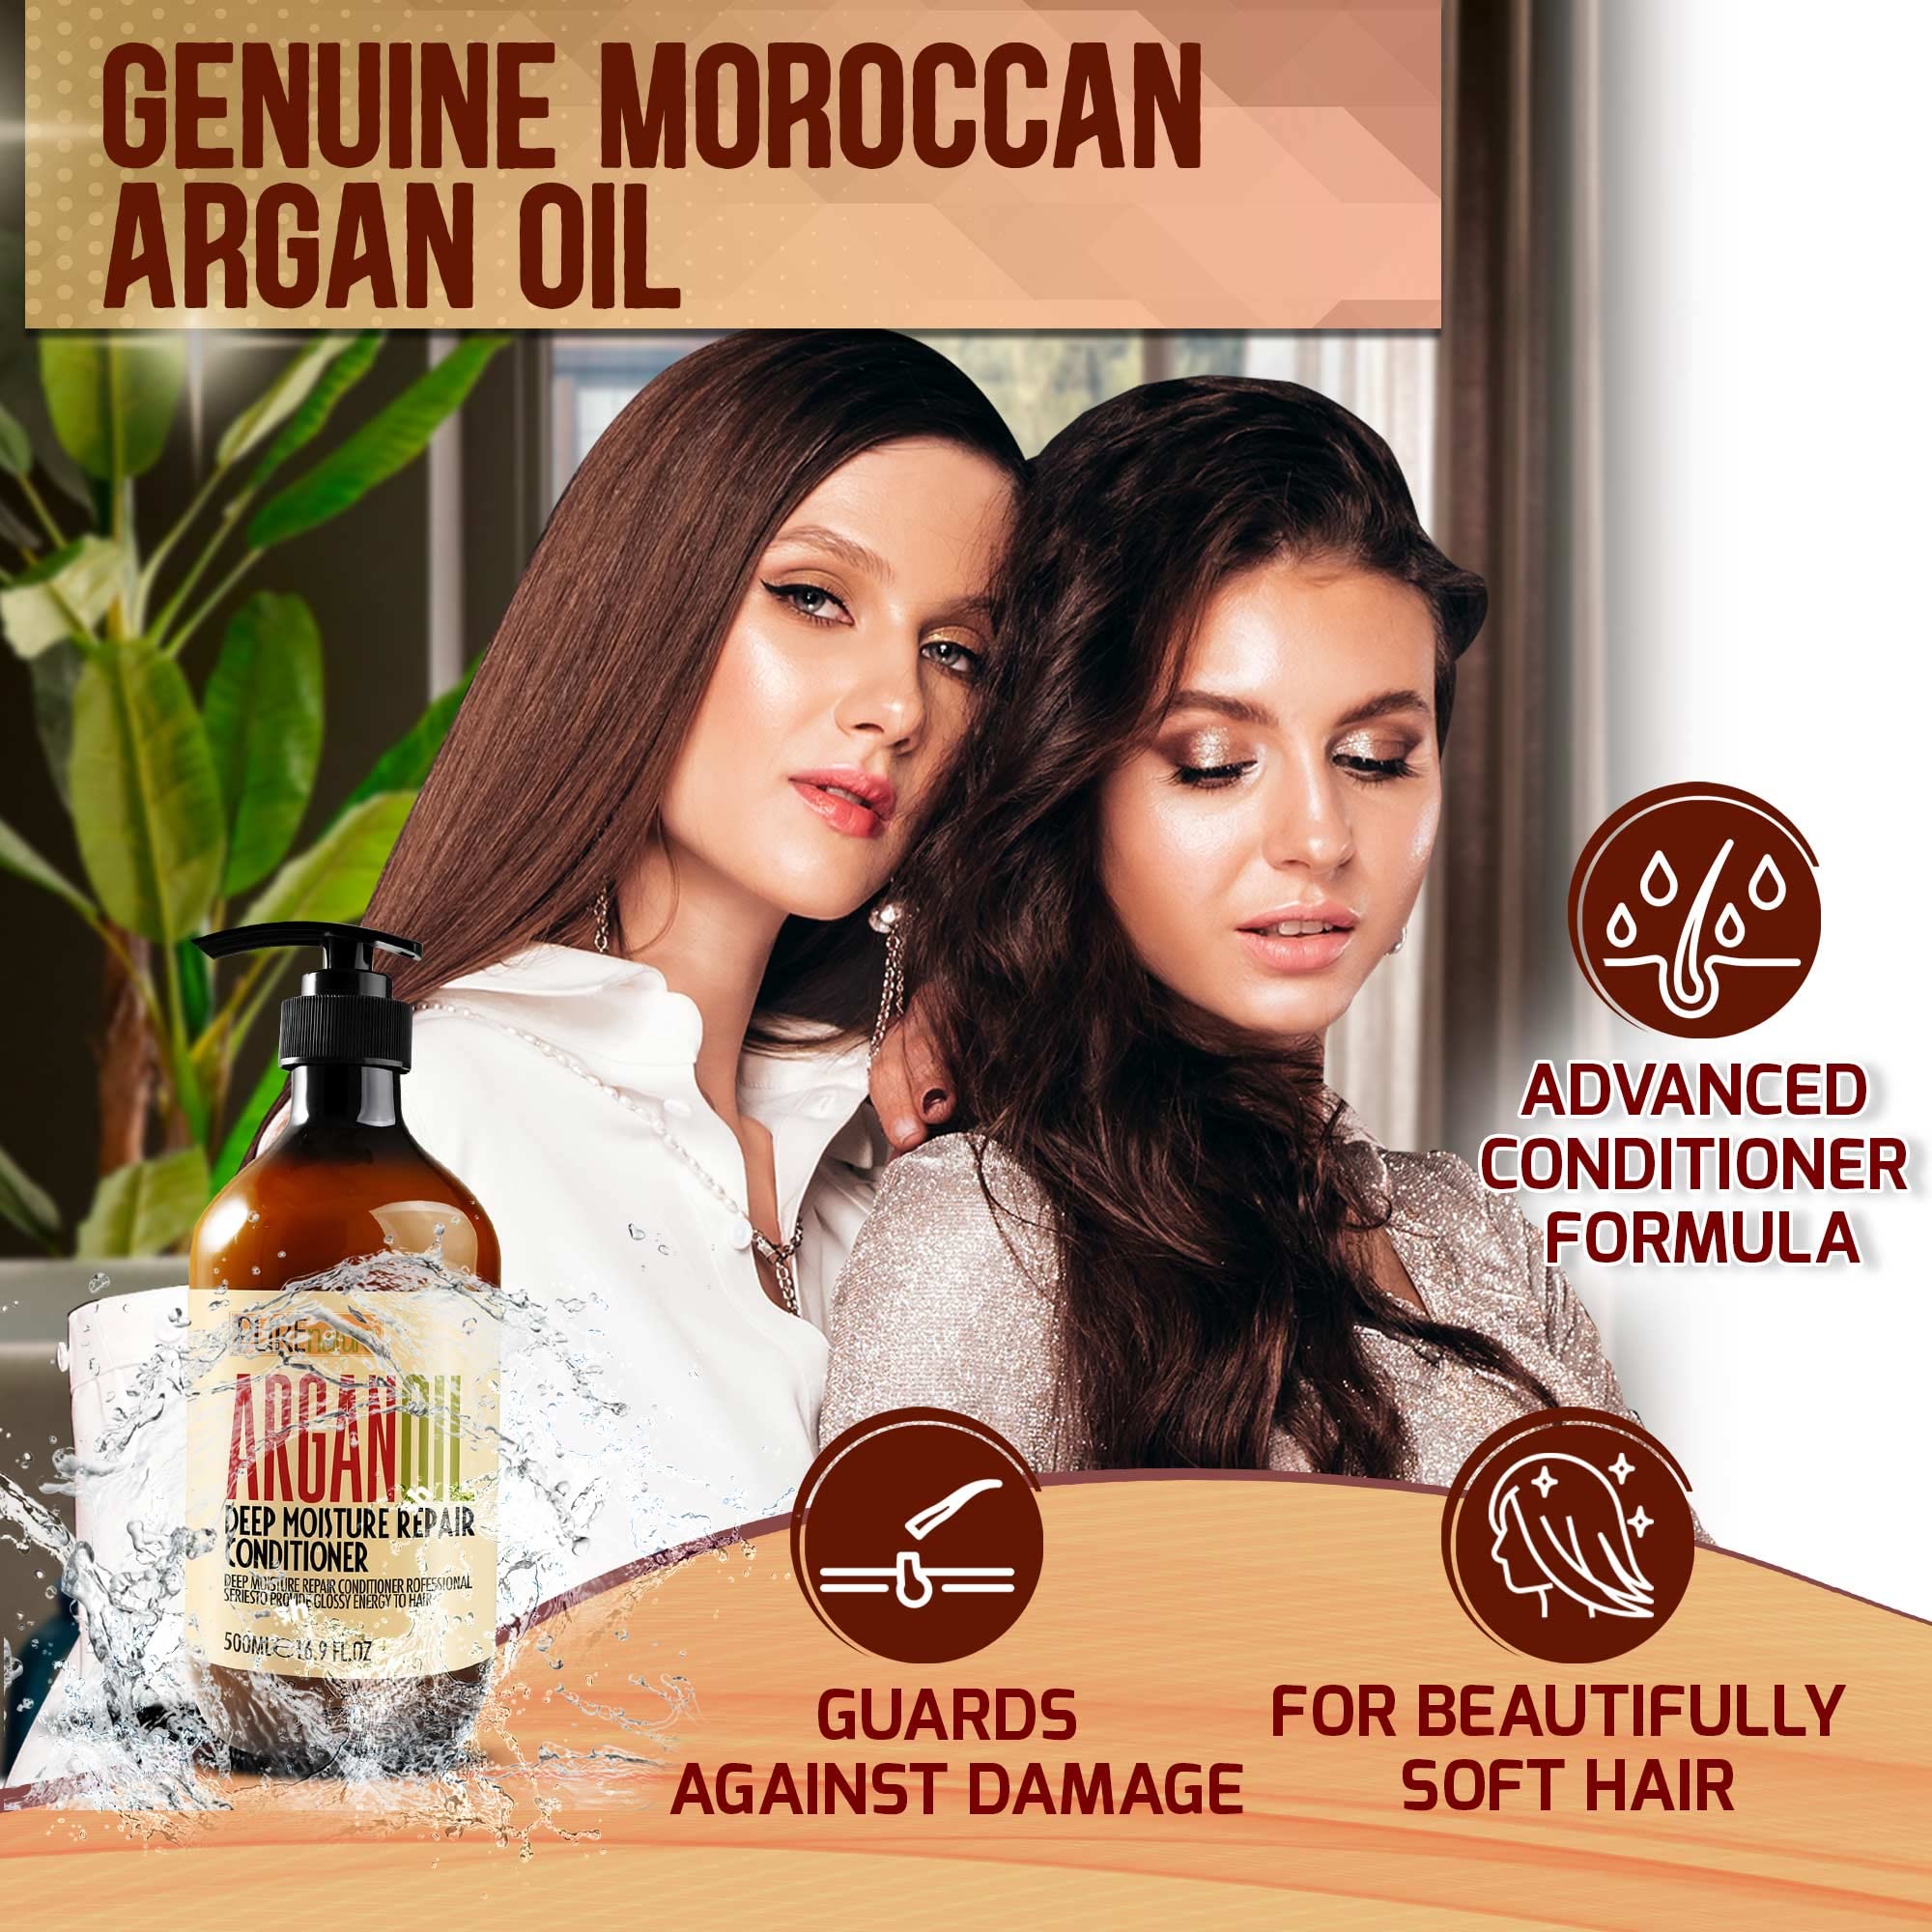 Moroccan Argan Oil Conditioner - Sulfate Free Products for Women and Men - Deep Moisturizing for Dry, Curly, Colored, Damaged Hair - Hydrating Repair, Salon Grade Formula for All Hair Types